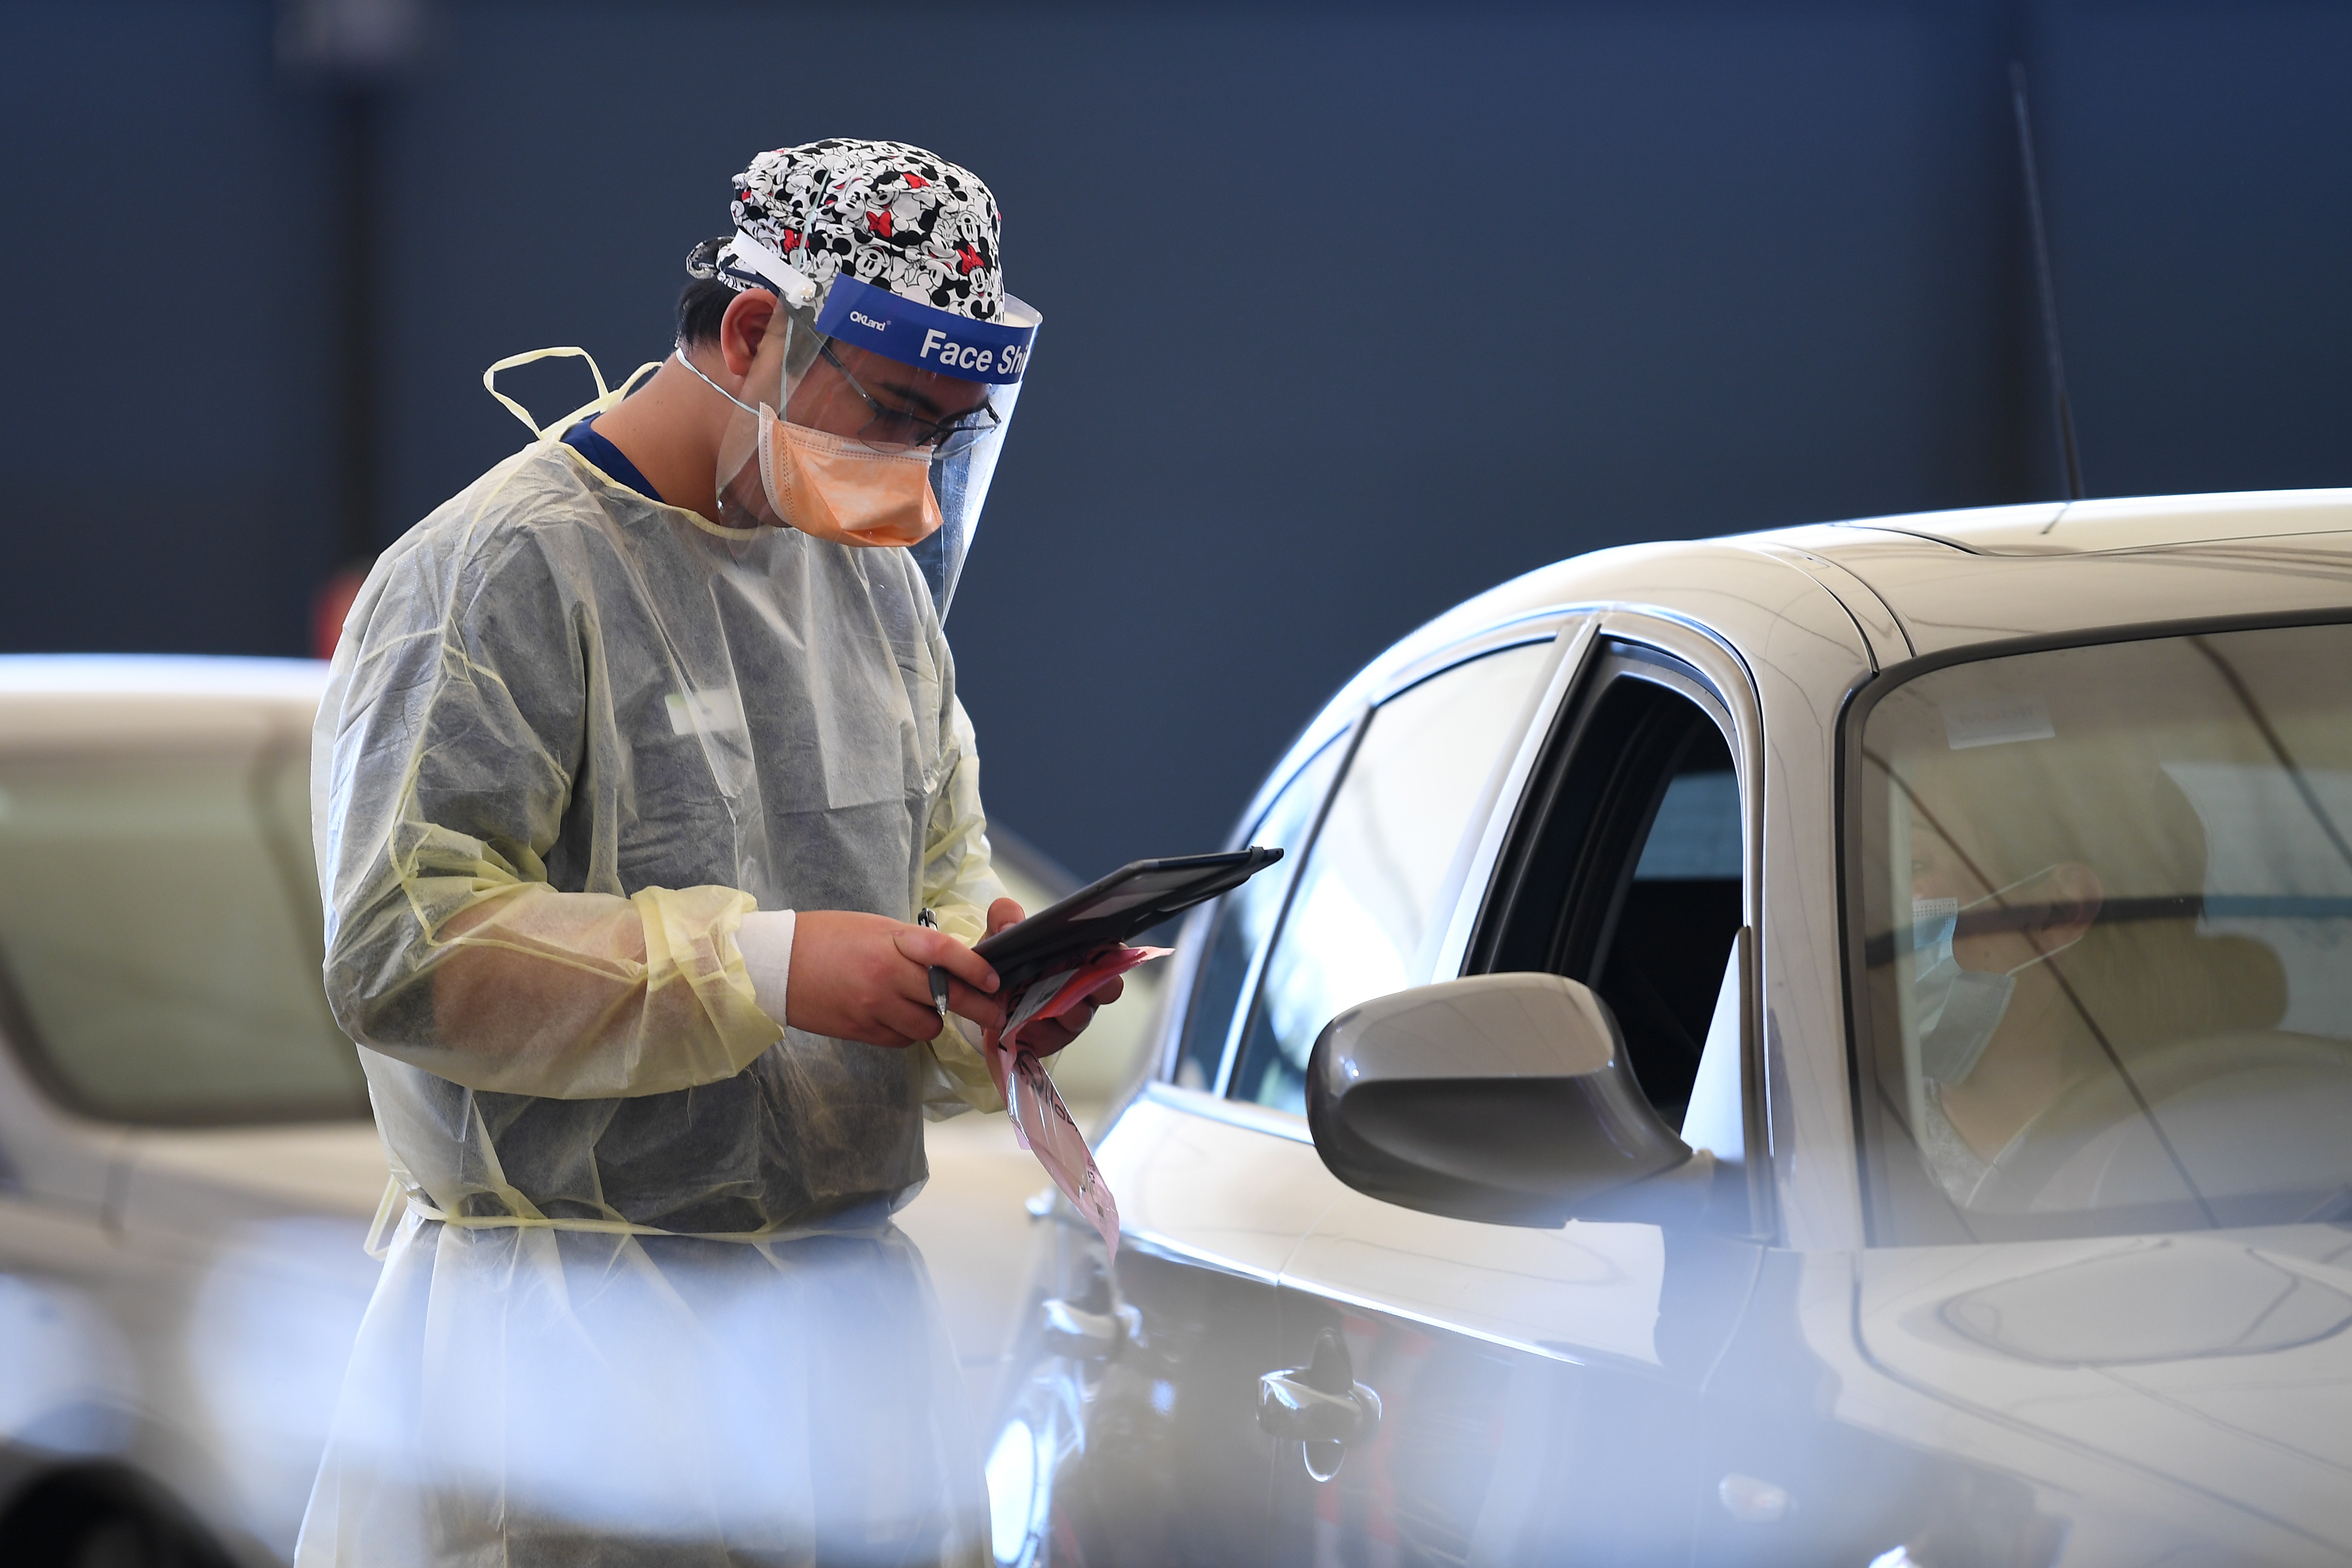 Helathcare worker Allen Pelisco is seen working at a drive-through Covid19 testing facility in Melbourne